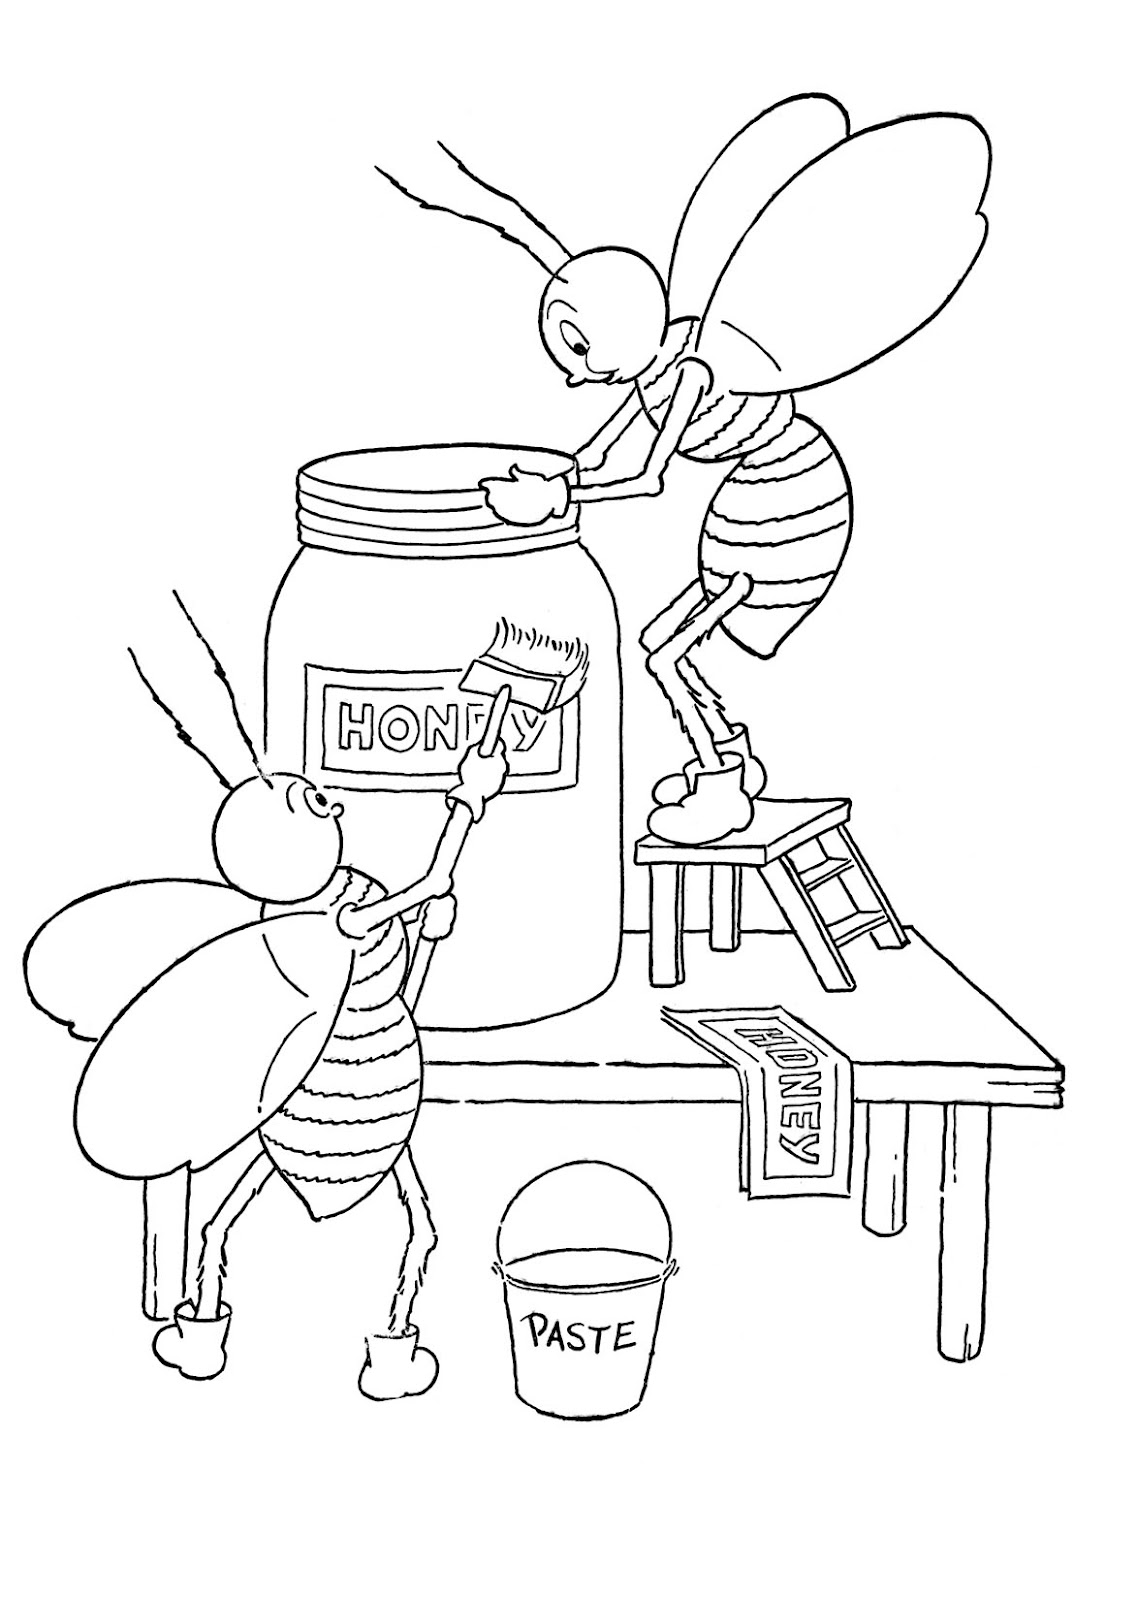 Kids Printable Honey Bees Coloring Page The Graphics Fairy